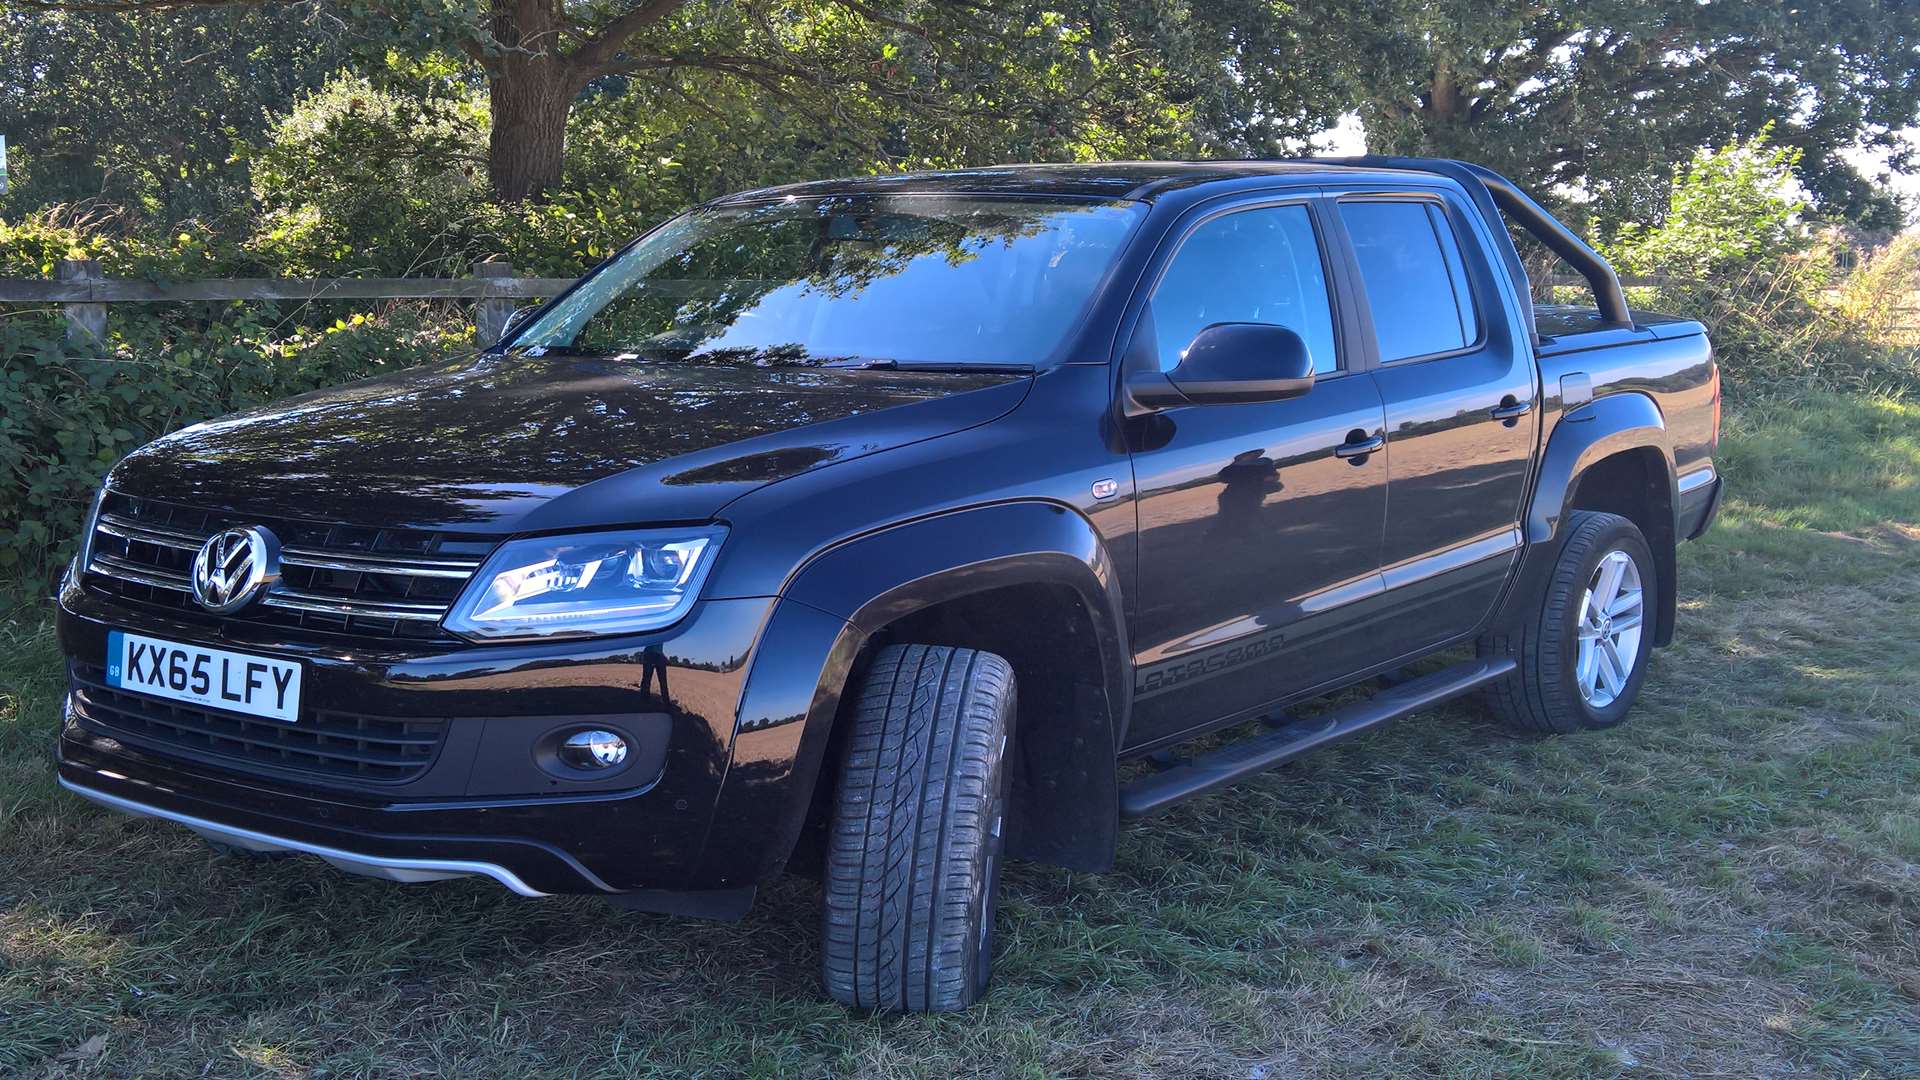 The Amarok is unmistakeably a member of the VW stable